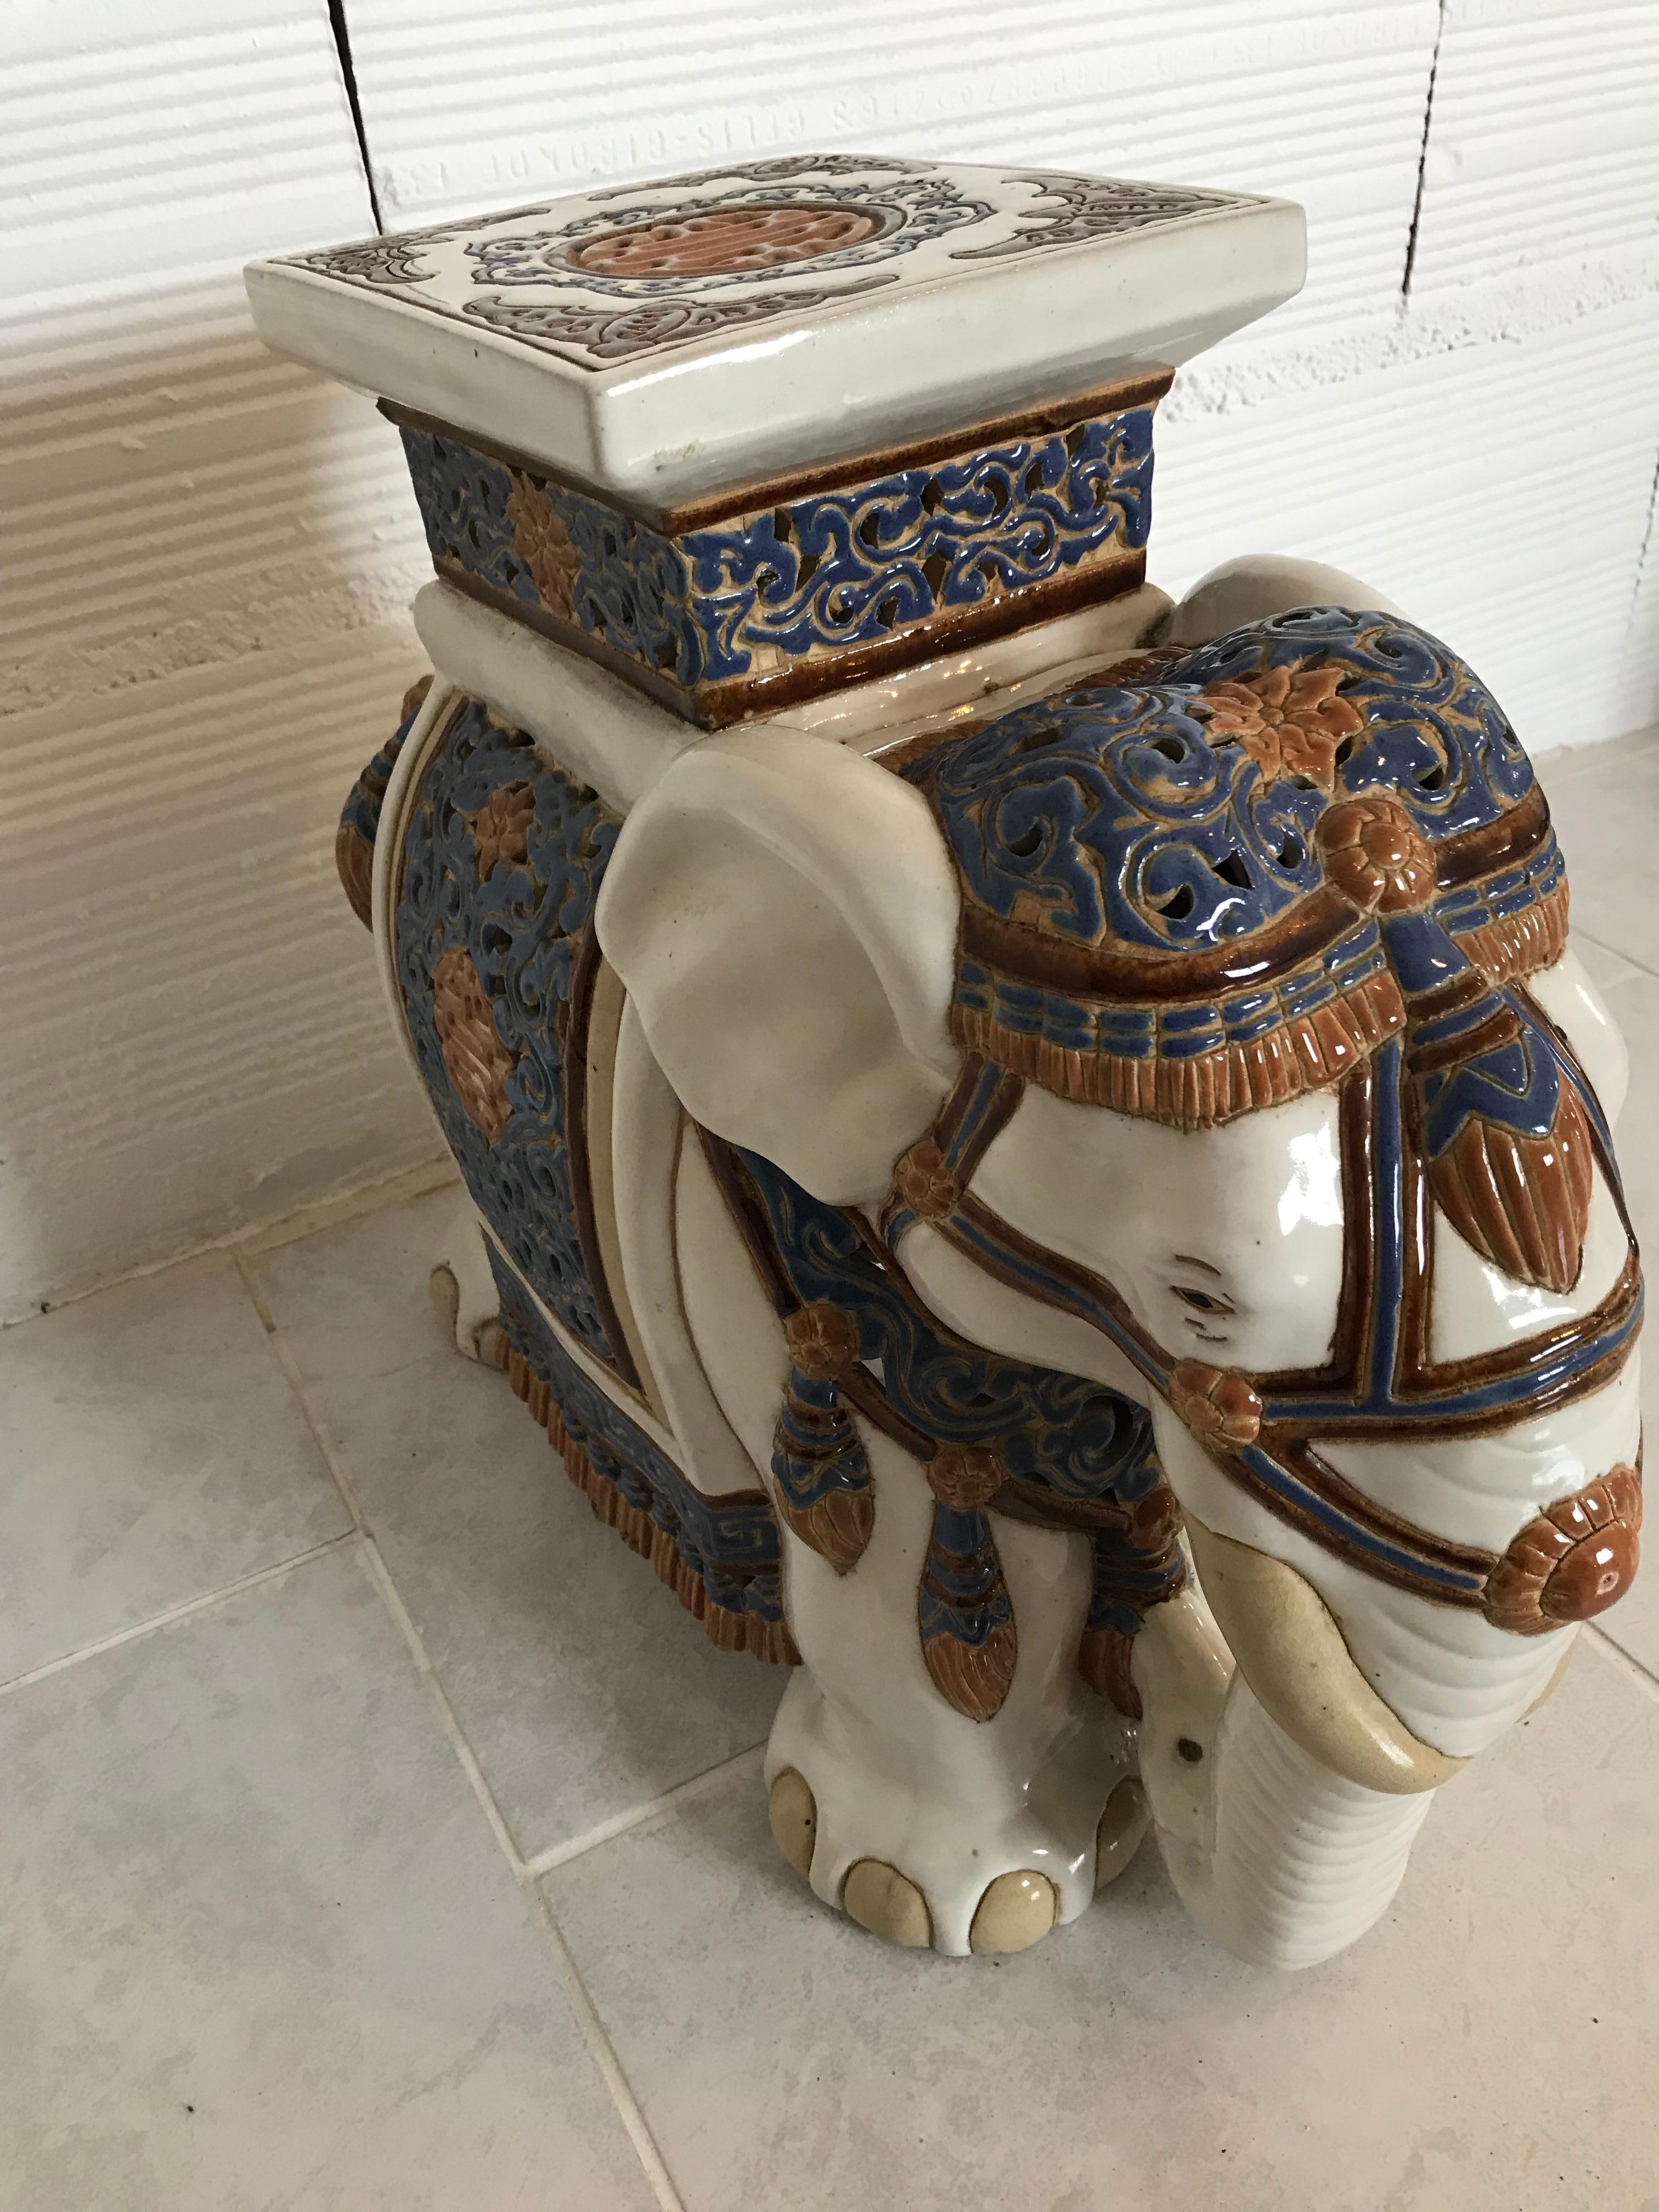 Mid to late 20th century glazed ceramic elephant garden stool, flower pot stand, seat or side table. Handmade of ceramic. Very nicely pierced, this is a quality example still retaining fine definition around the eyes and crisp colouring. The